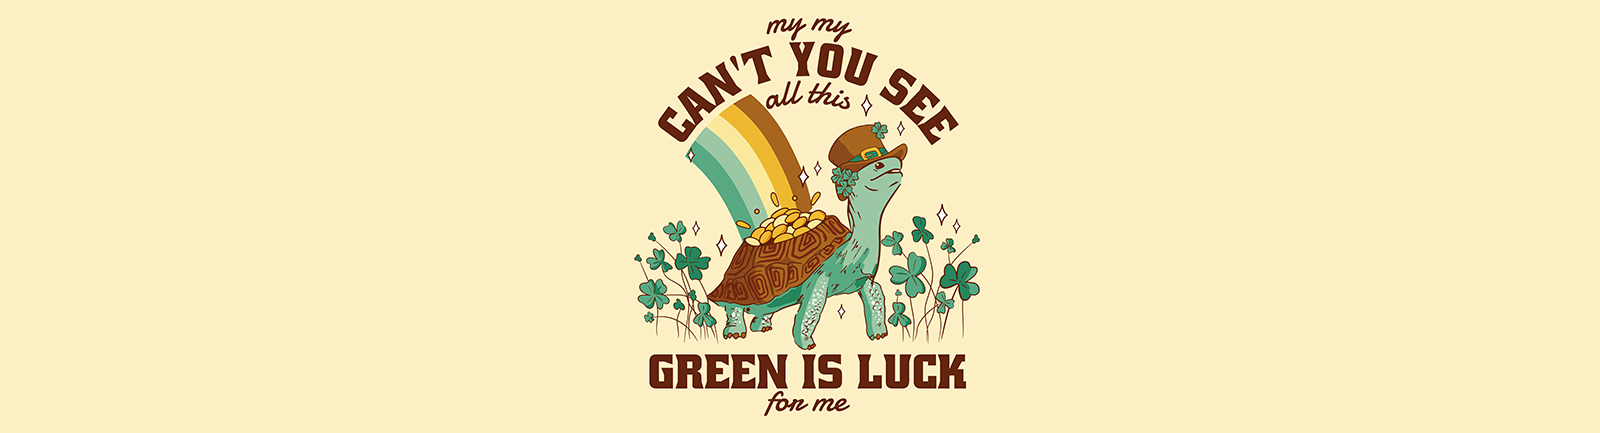 13 T-shirt Design Ideas for St. Patrick’s Day in 2022